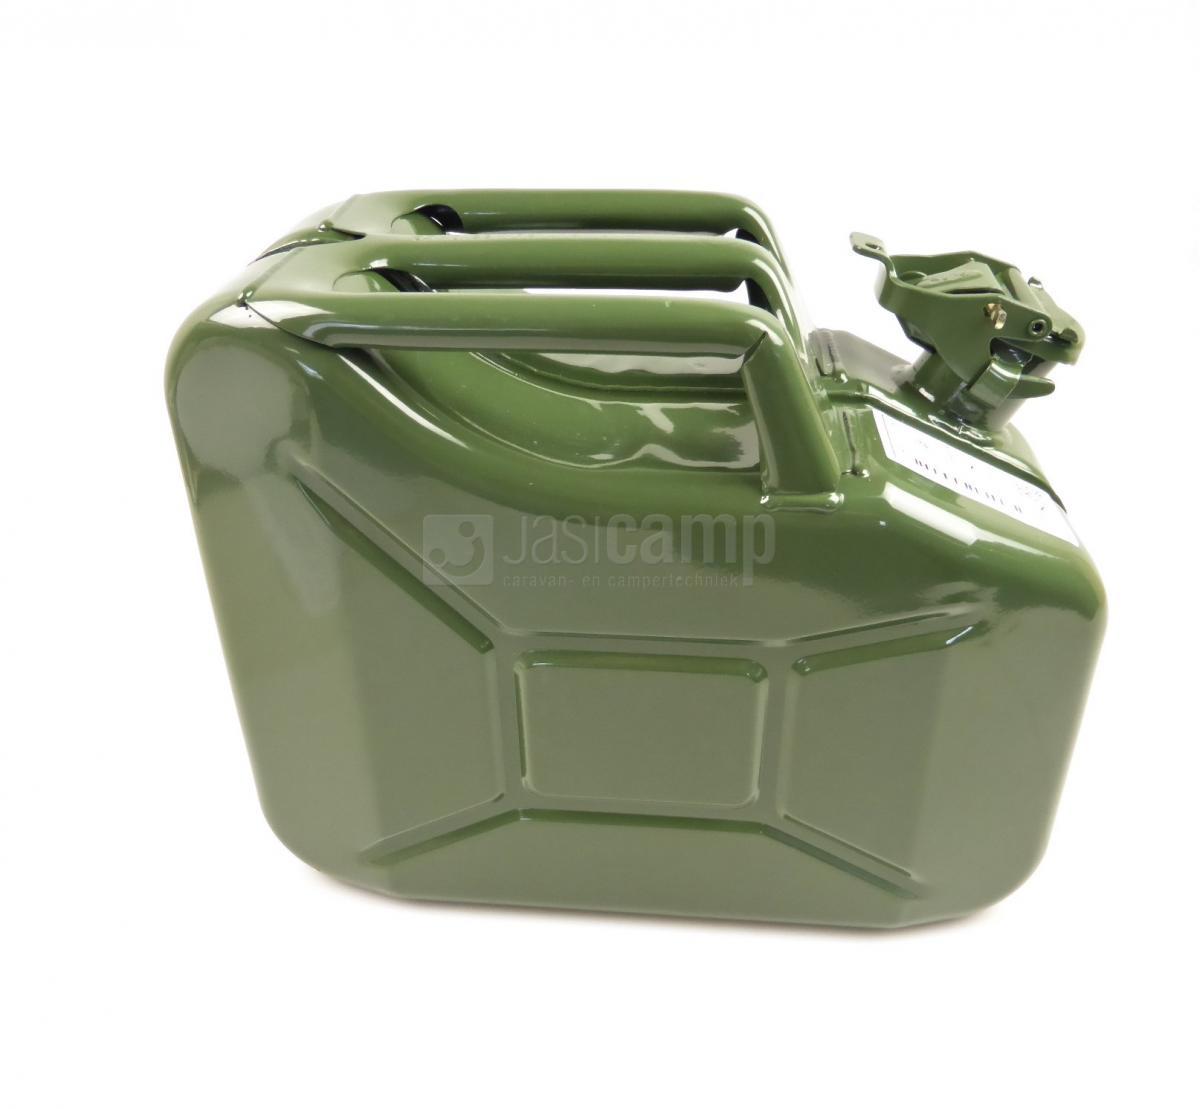 vermomming documentaire behuizing Jerrycan 10 liter metaal groen RAL 6003 nr. 86.00.00